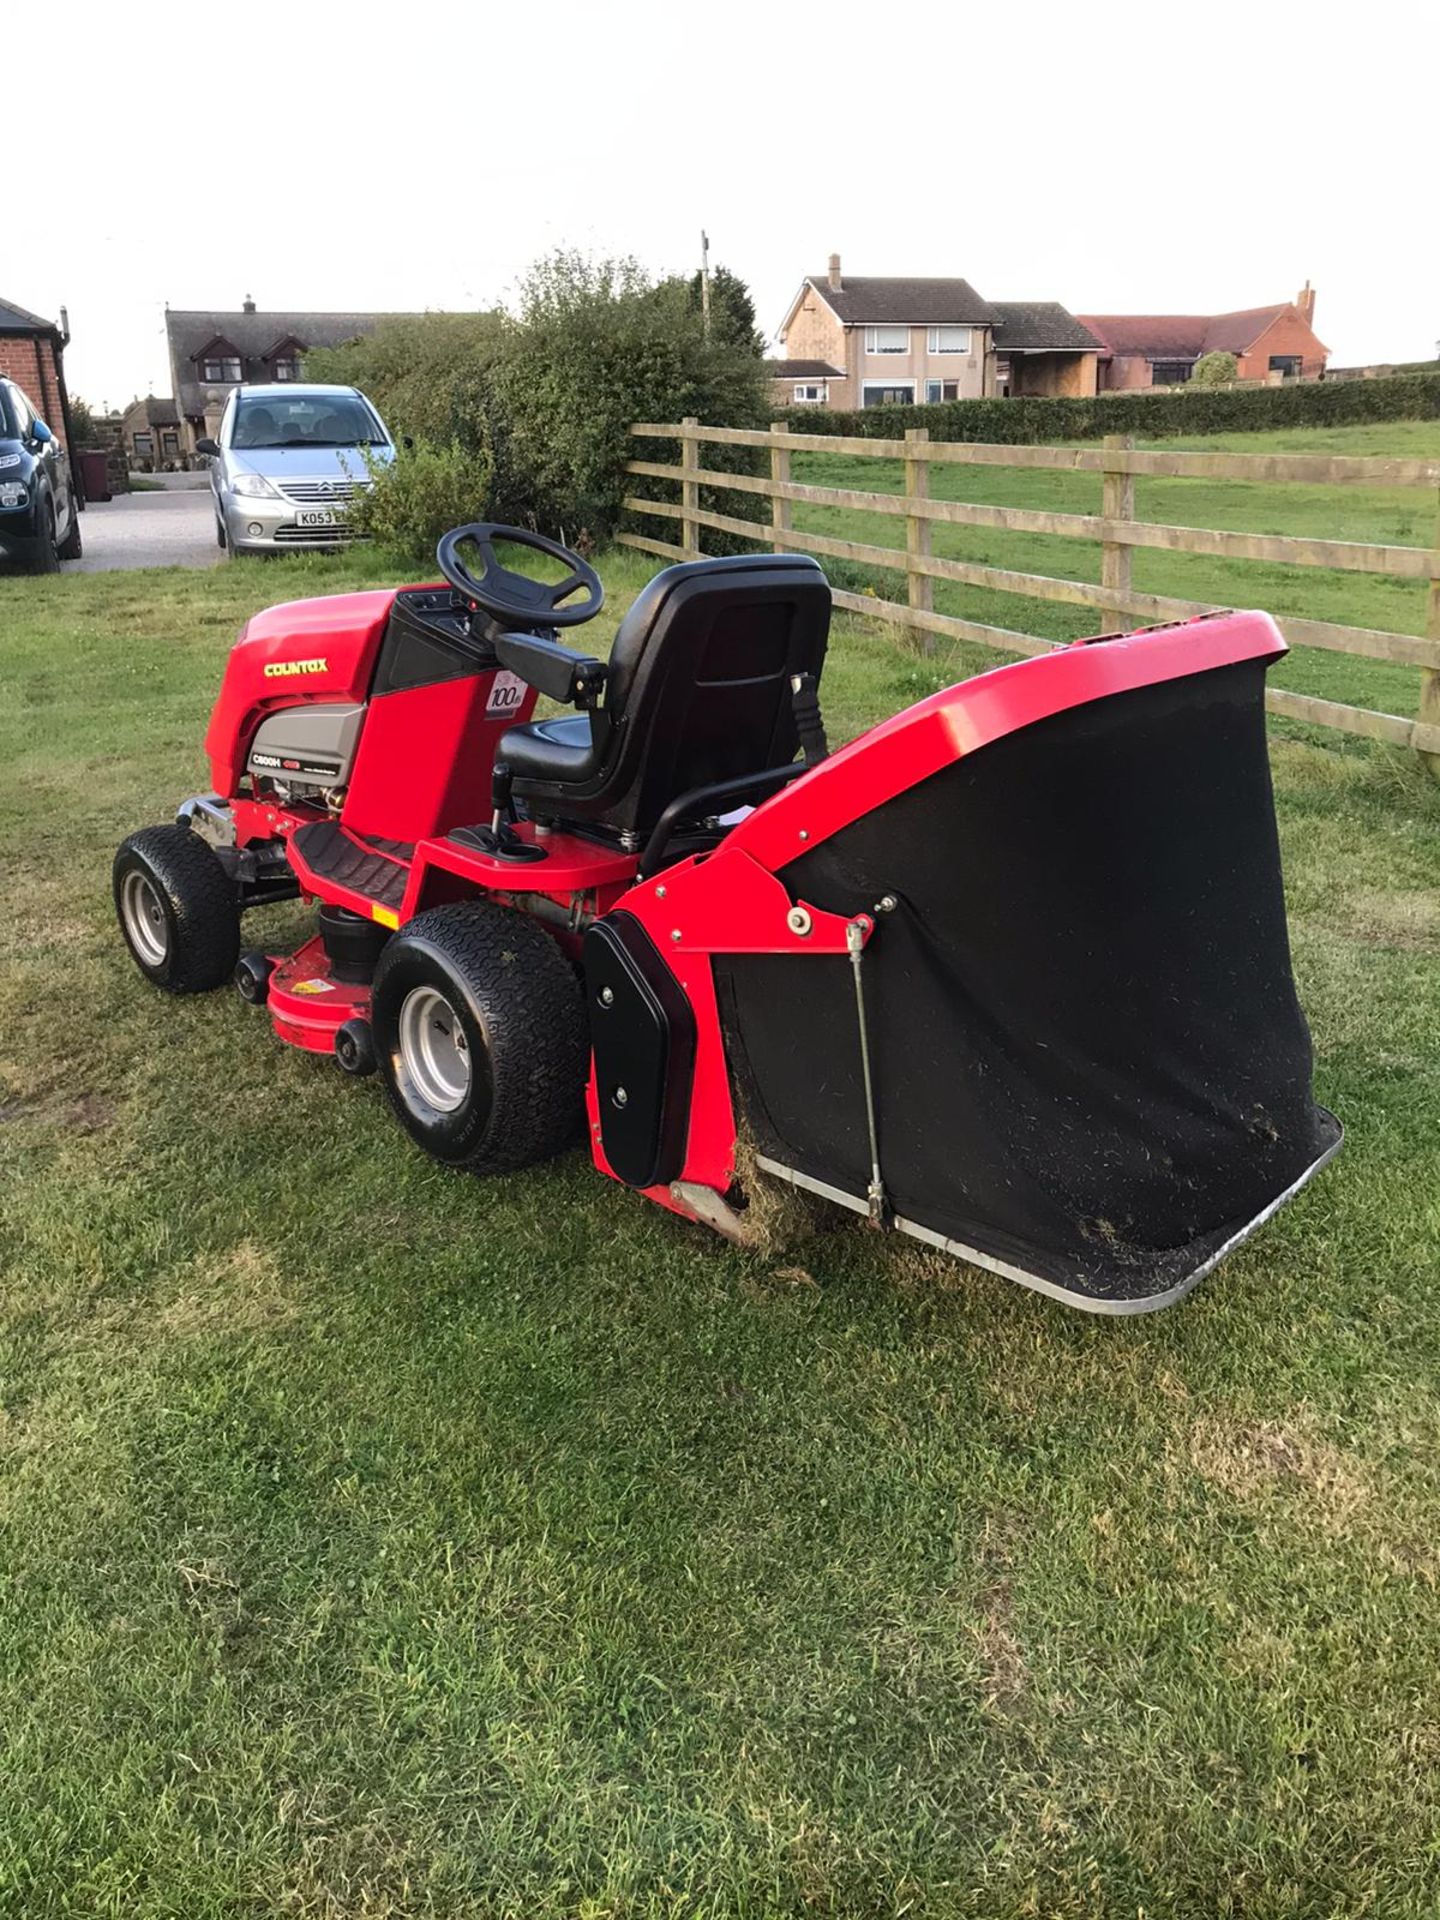 COUNTAX C600H 4WD RIDE ON LAWN MOWER, RUNS, DRIVES AND CUTS, CLEAN MACHINE, GREAT CONDITON *NO VAT* - Image 4 of 6